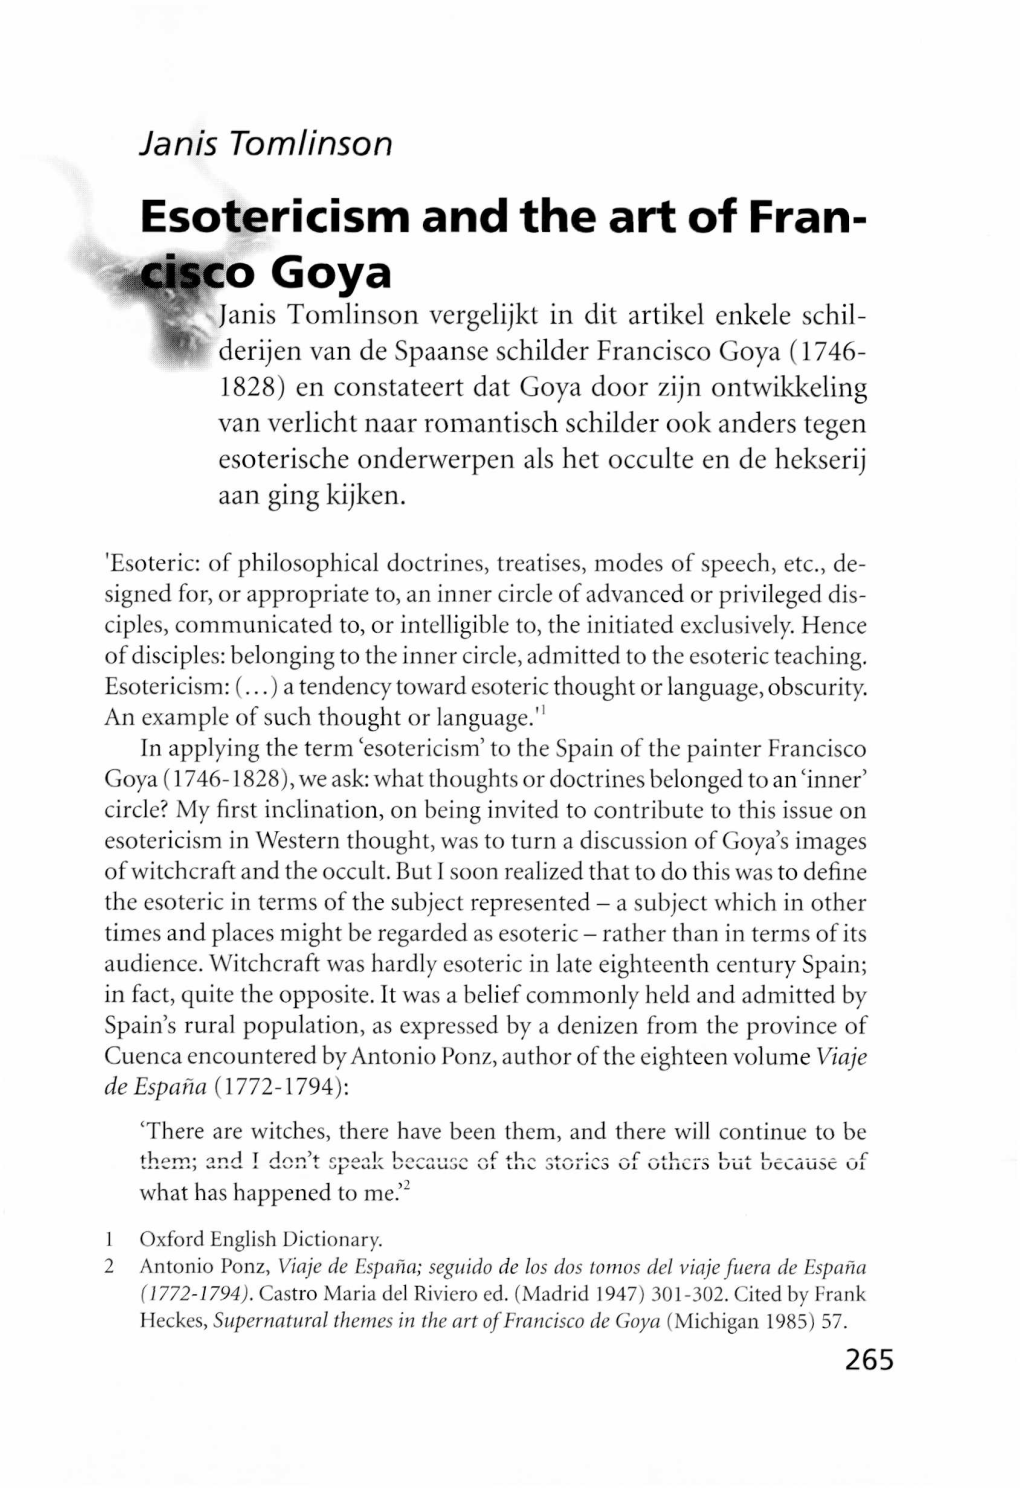 Esotericism and the Art of Fran- O Goya